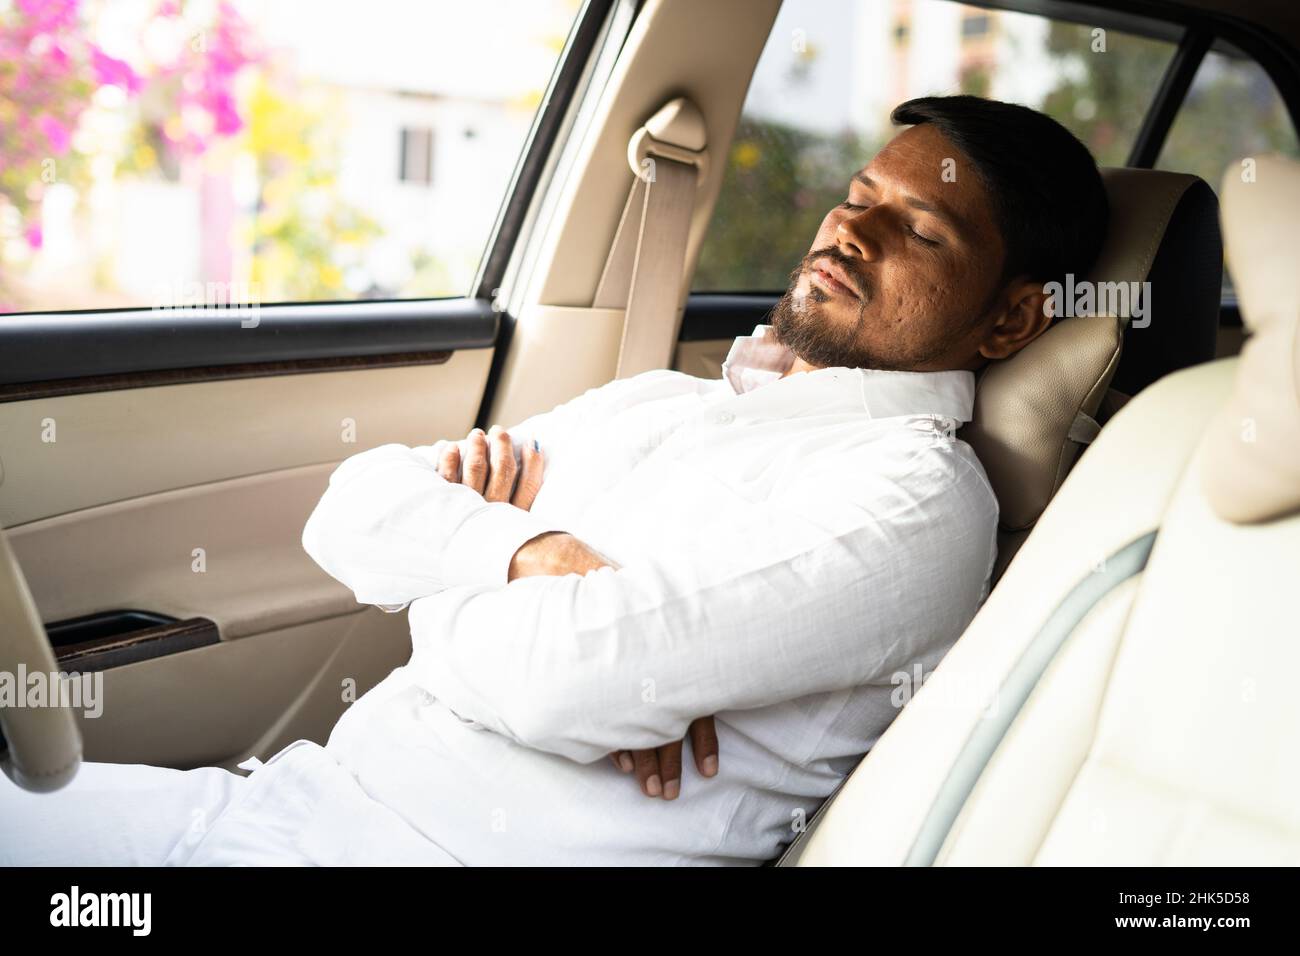 tired cab driver resting or sleeping by pushing car seat during break time - concept of overworked, exhausted and low business or no passengers Stock Photo